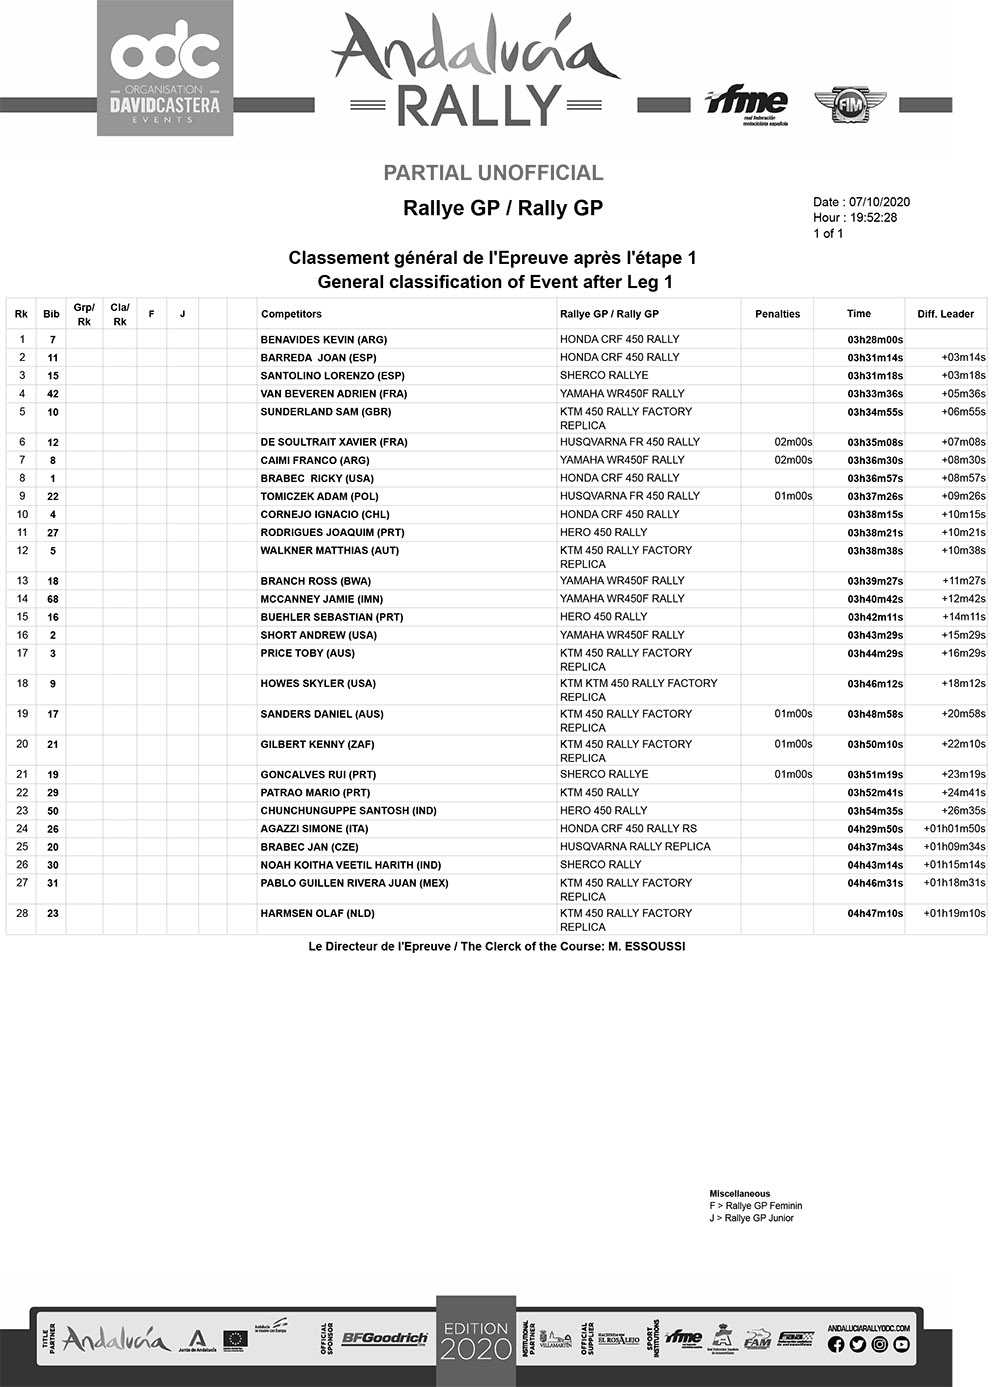 unofficial-classification-after-leg-1-rallygp